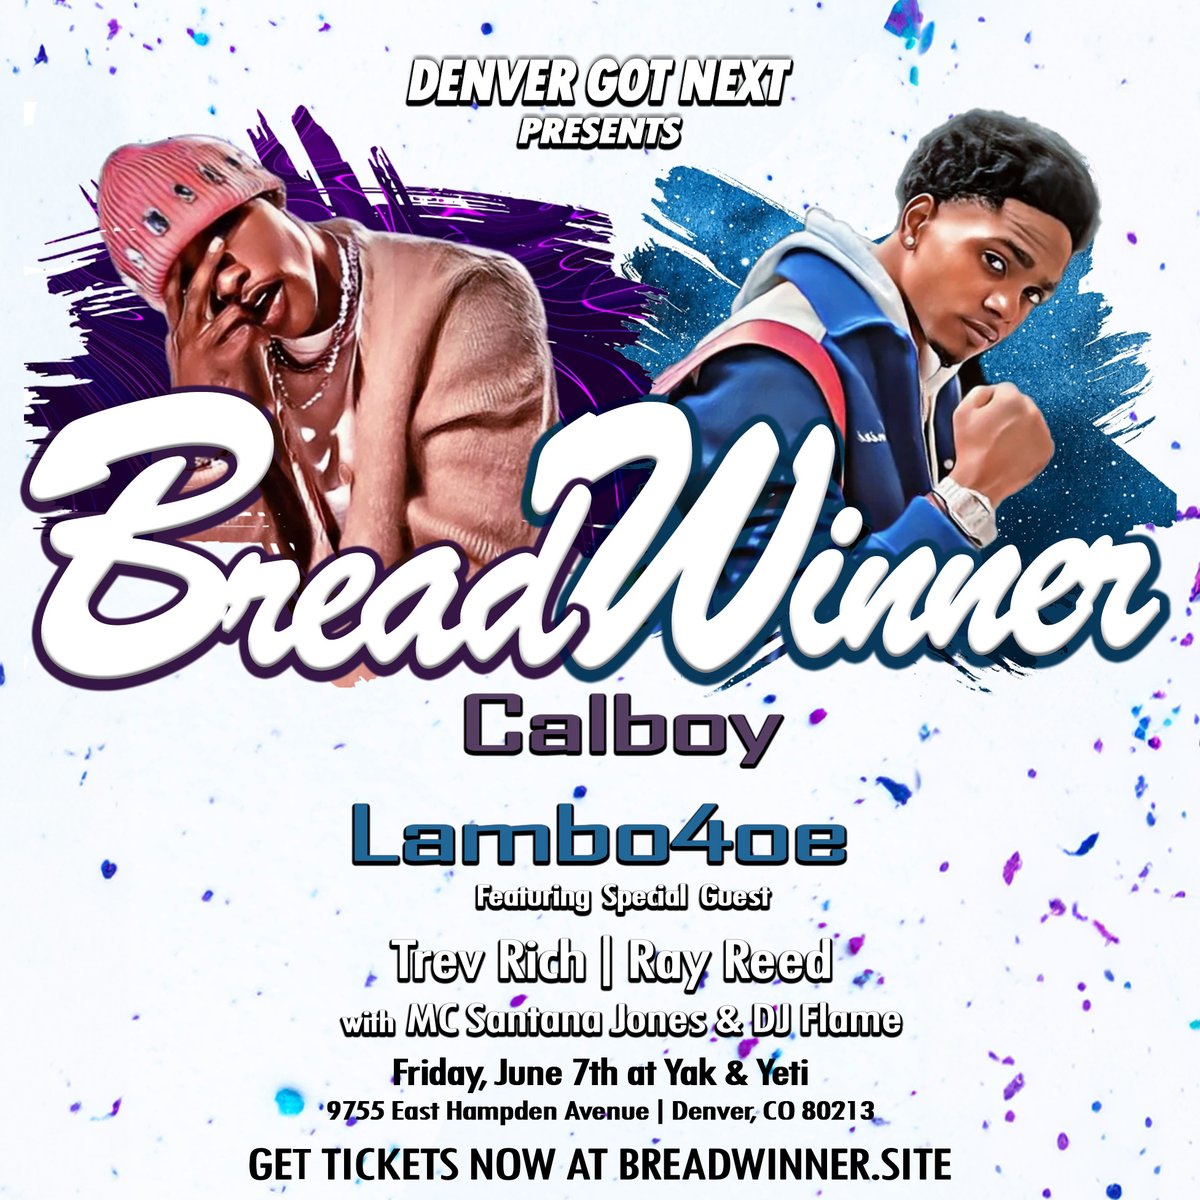 🍞🏆LINEUP ALERT!🏆🍞 @TrevRichHD , @RayReed2 ,MC Santana Jones & DJ Flame will be joining hip-hop powerhouses @147Calboy & @Lambo4oe_ for Bread Winner when they come to rock their show on Friday, June 7th in Denver! Tickets are on sale now 🎟️ breadwinner.site